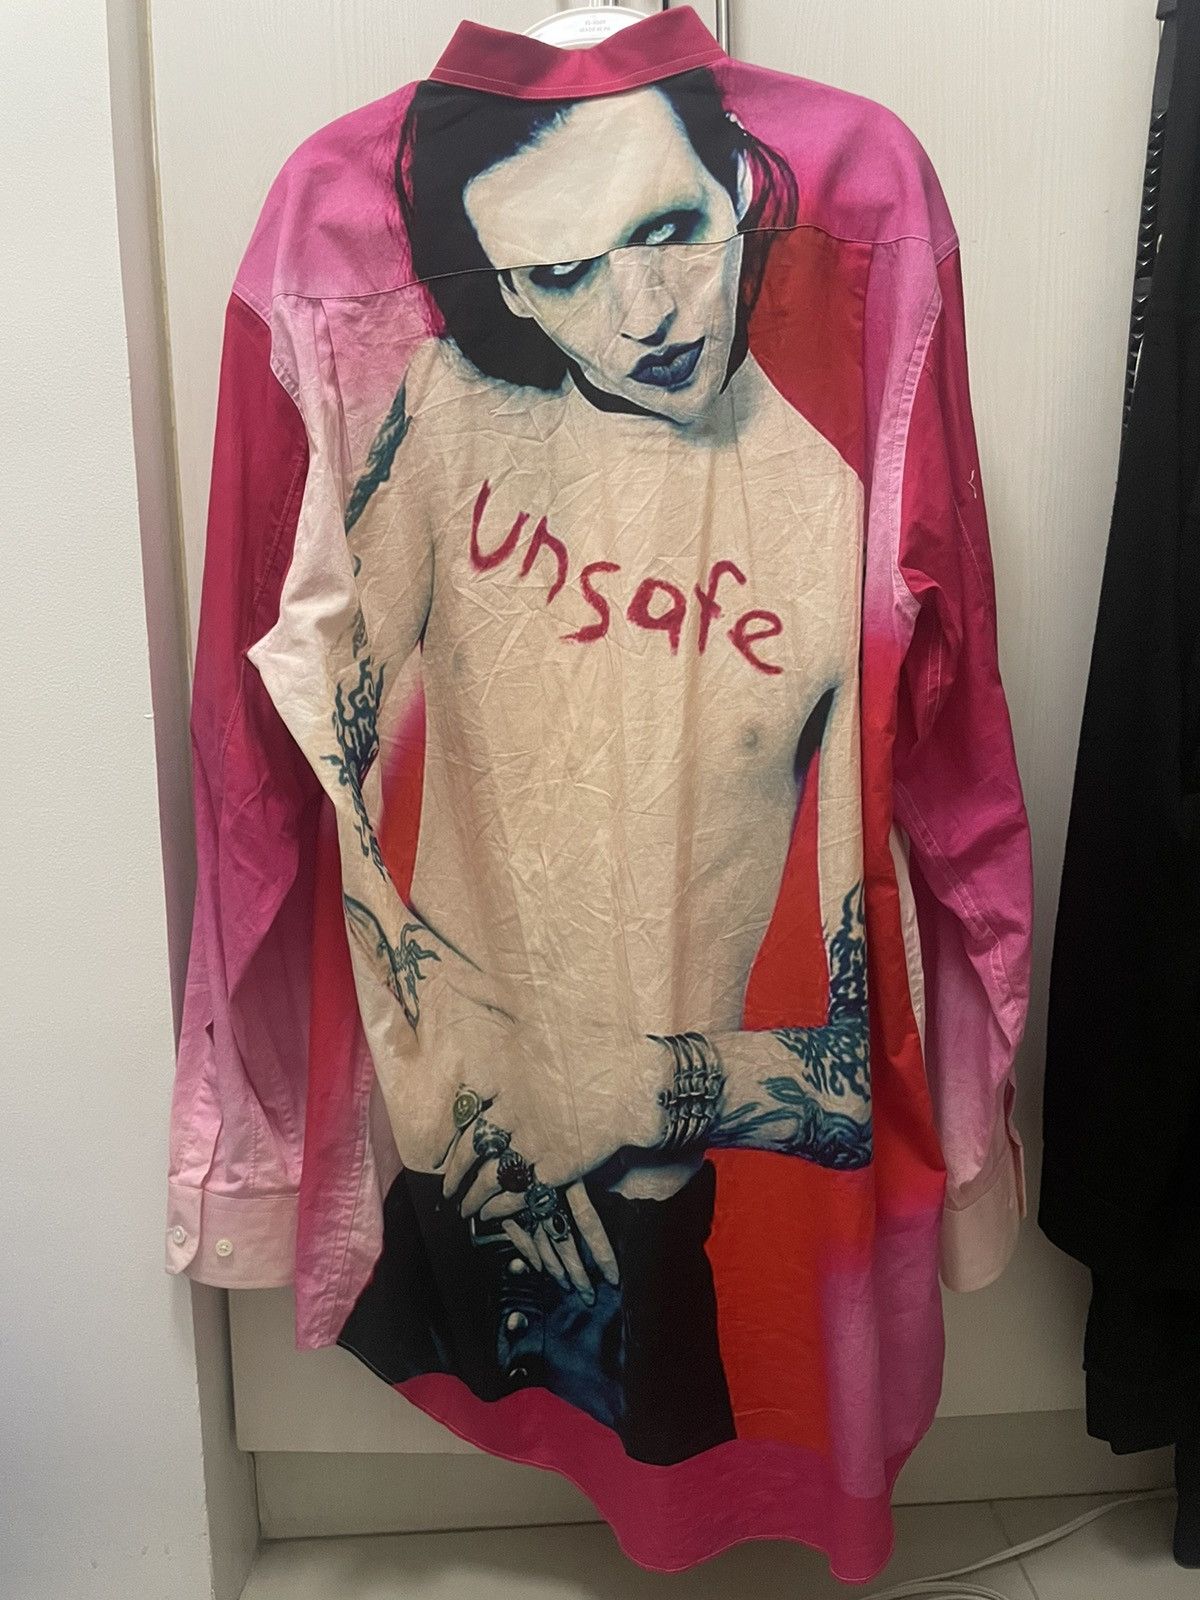 Vetements Vetements AW18 Marilyn Manson Pink Button Up Shirt | Grailed